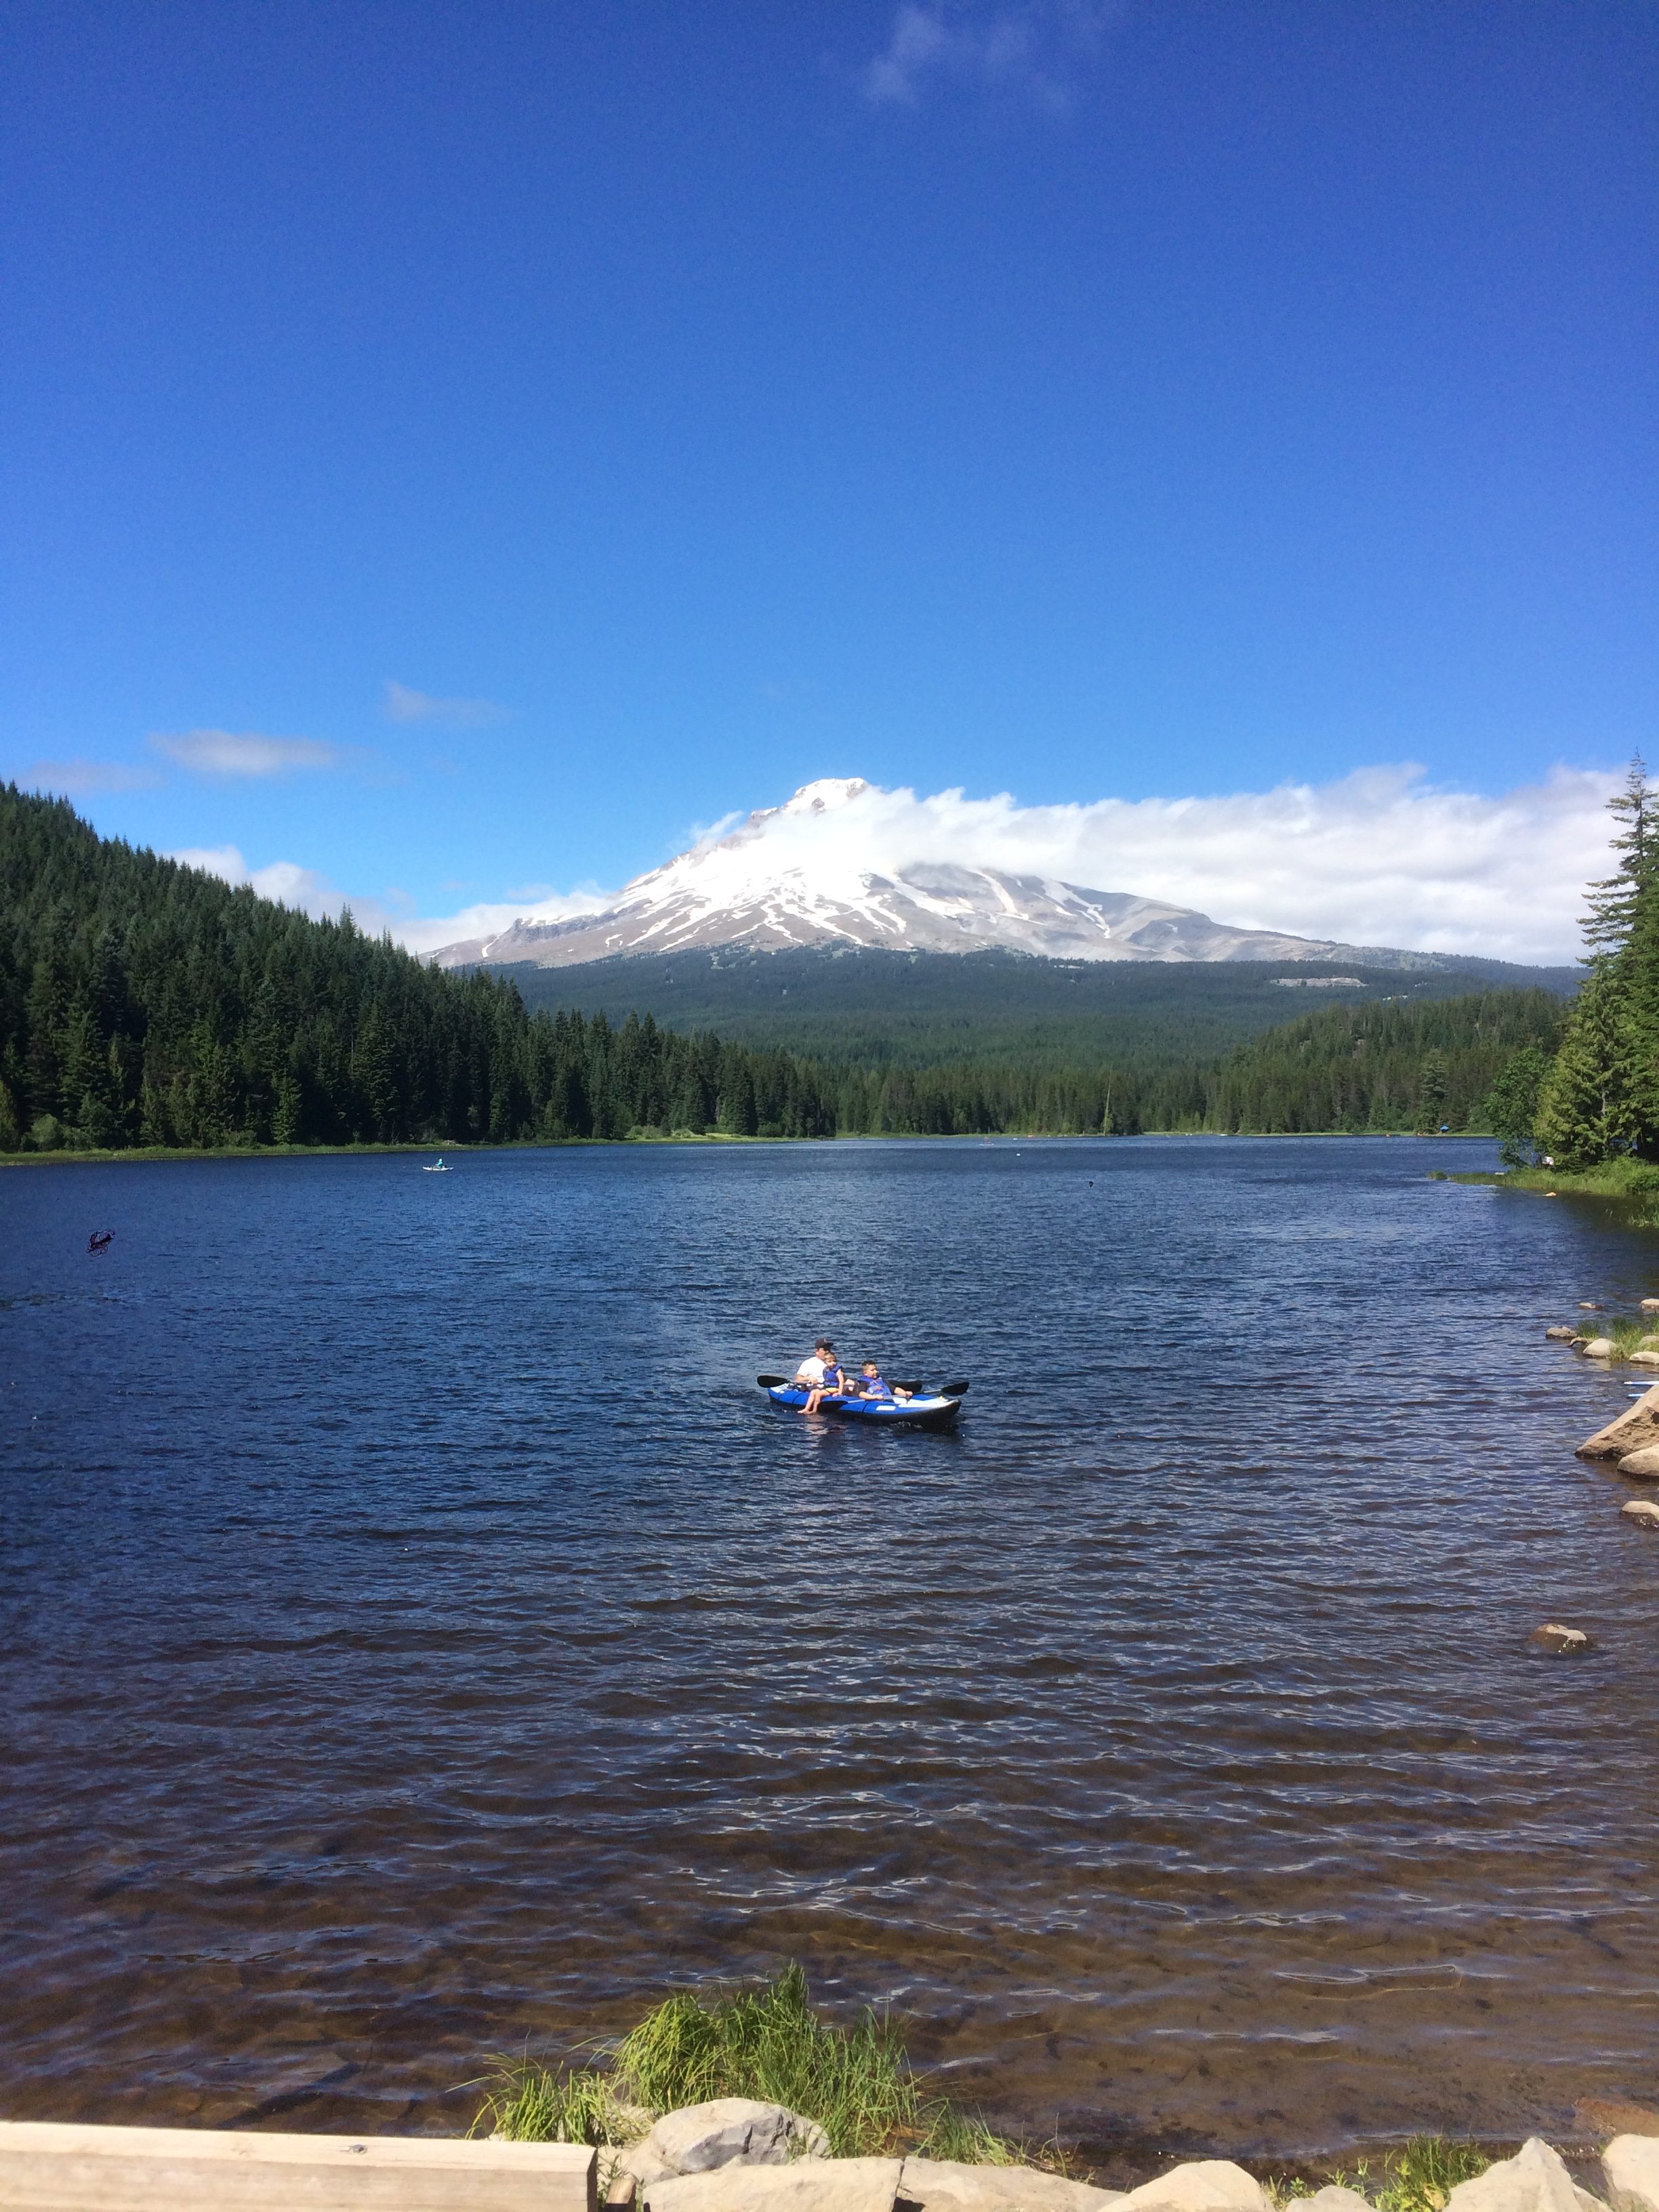 Mount Hood rising towards the sky above a blue mountain lake with a kayaker on it.